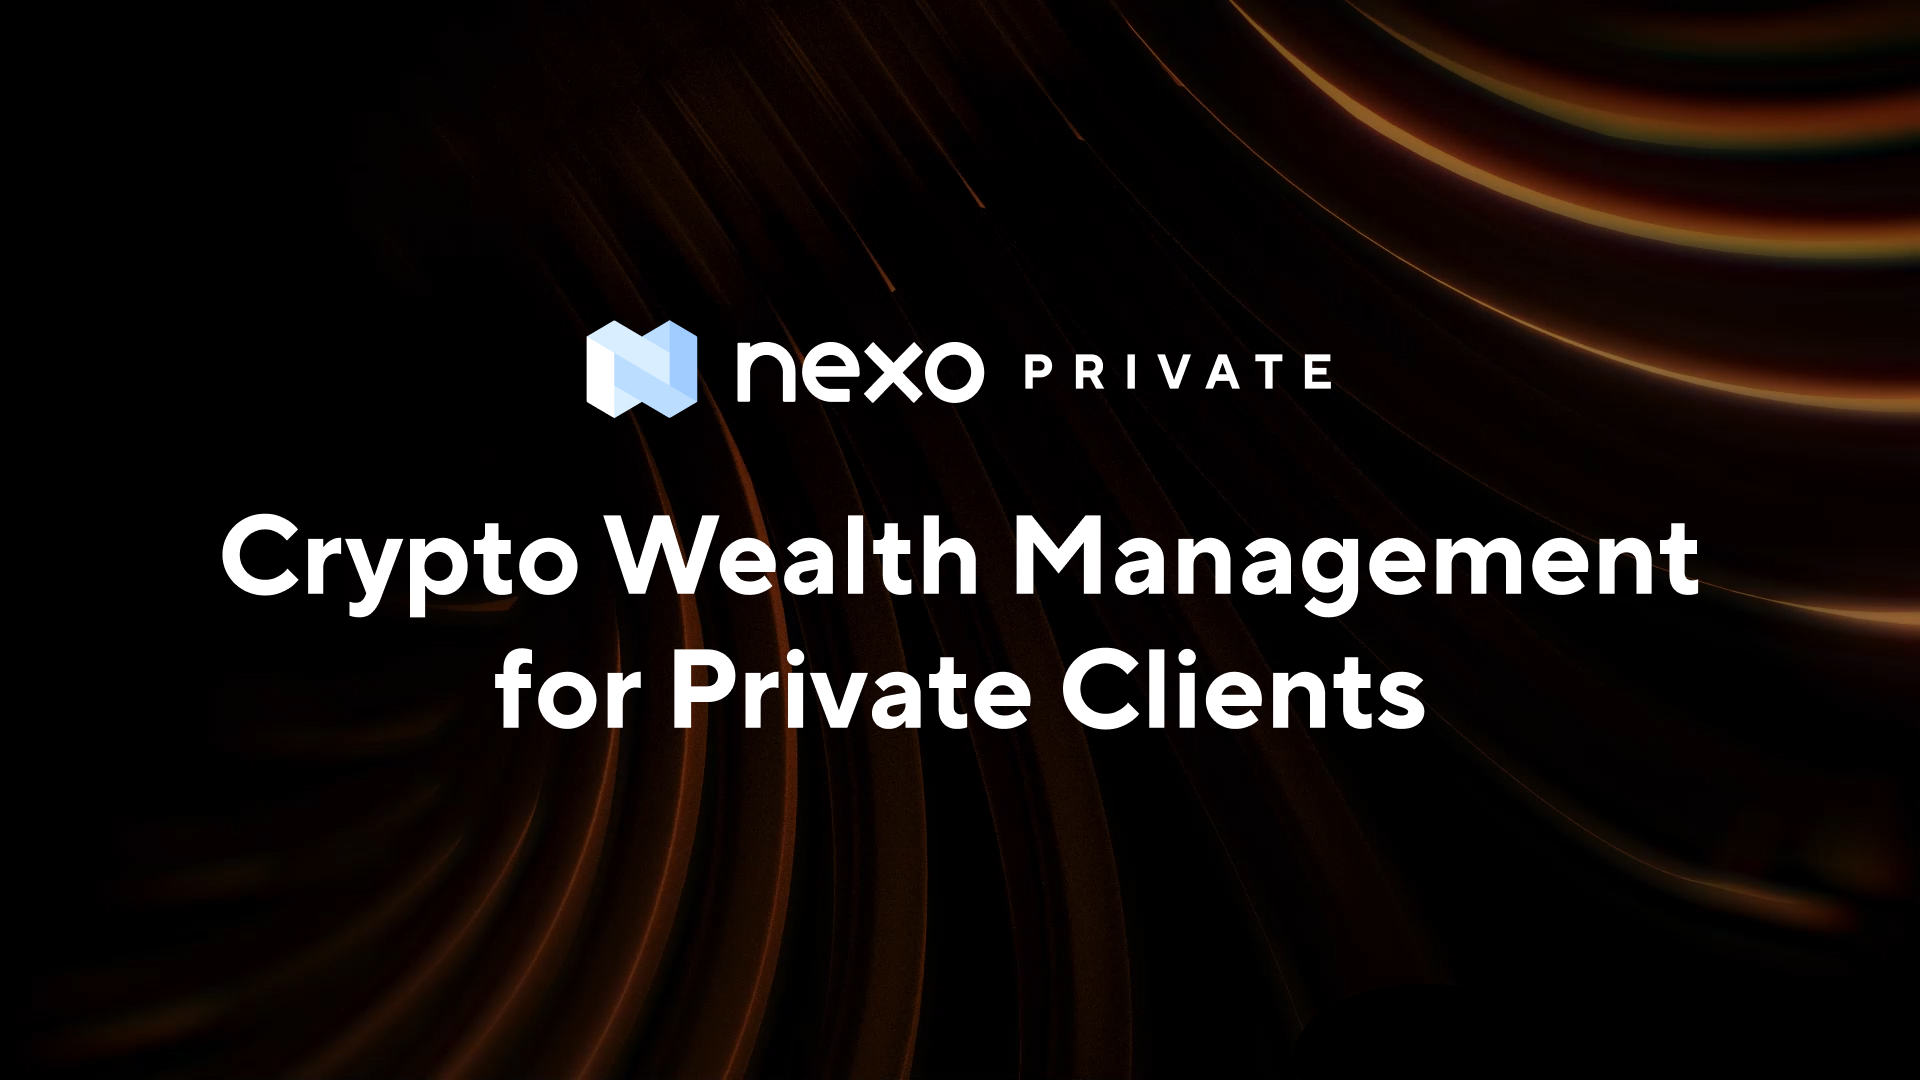 Nexo Launches Exclusive Wealth Management Suite for High-Value Clients and Family Offices